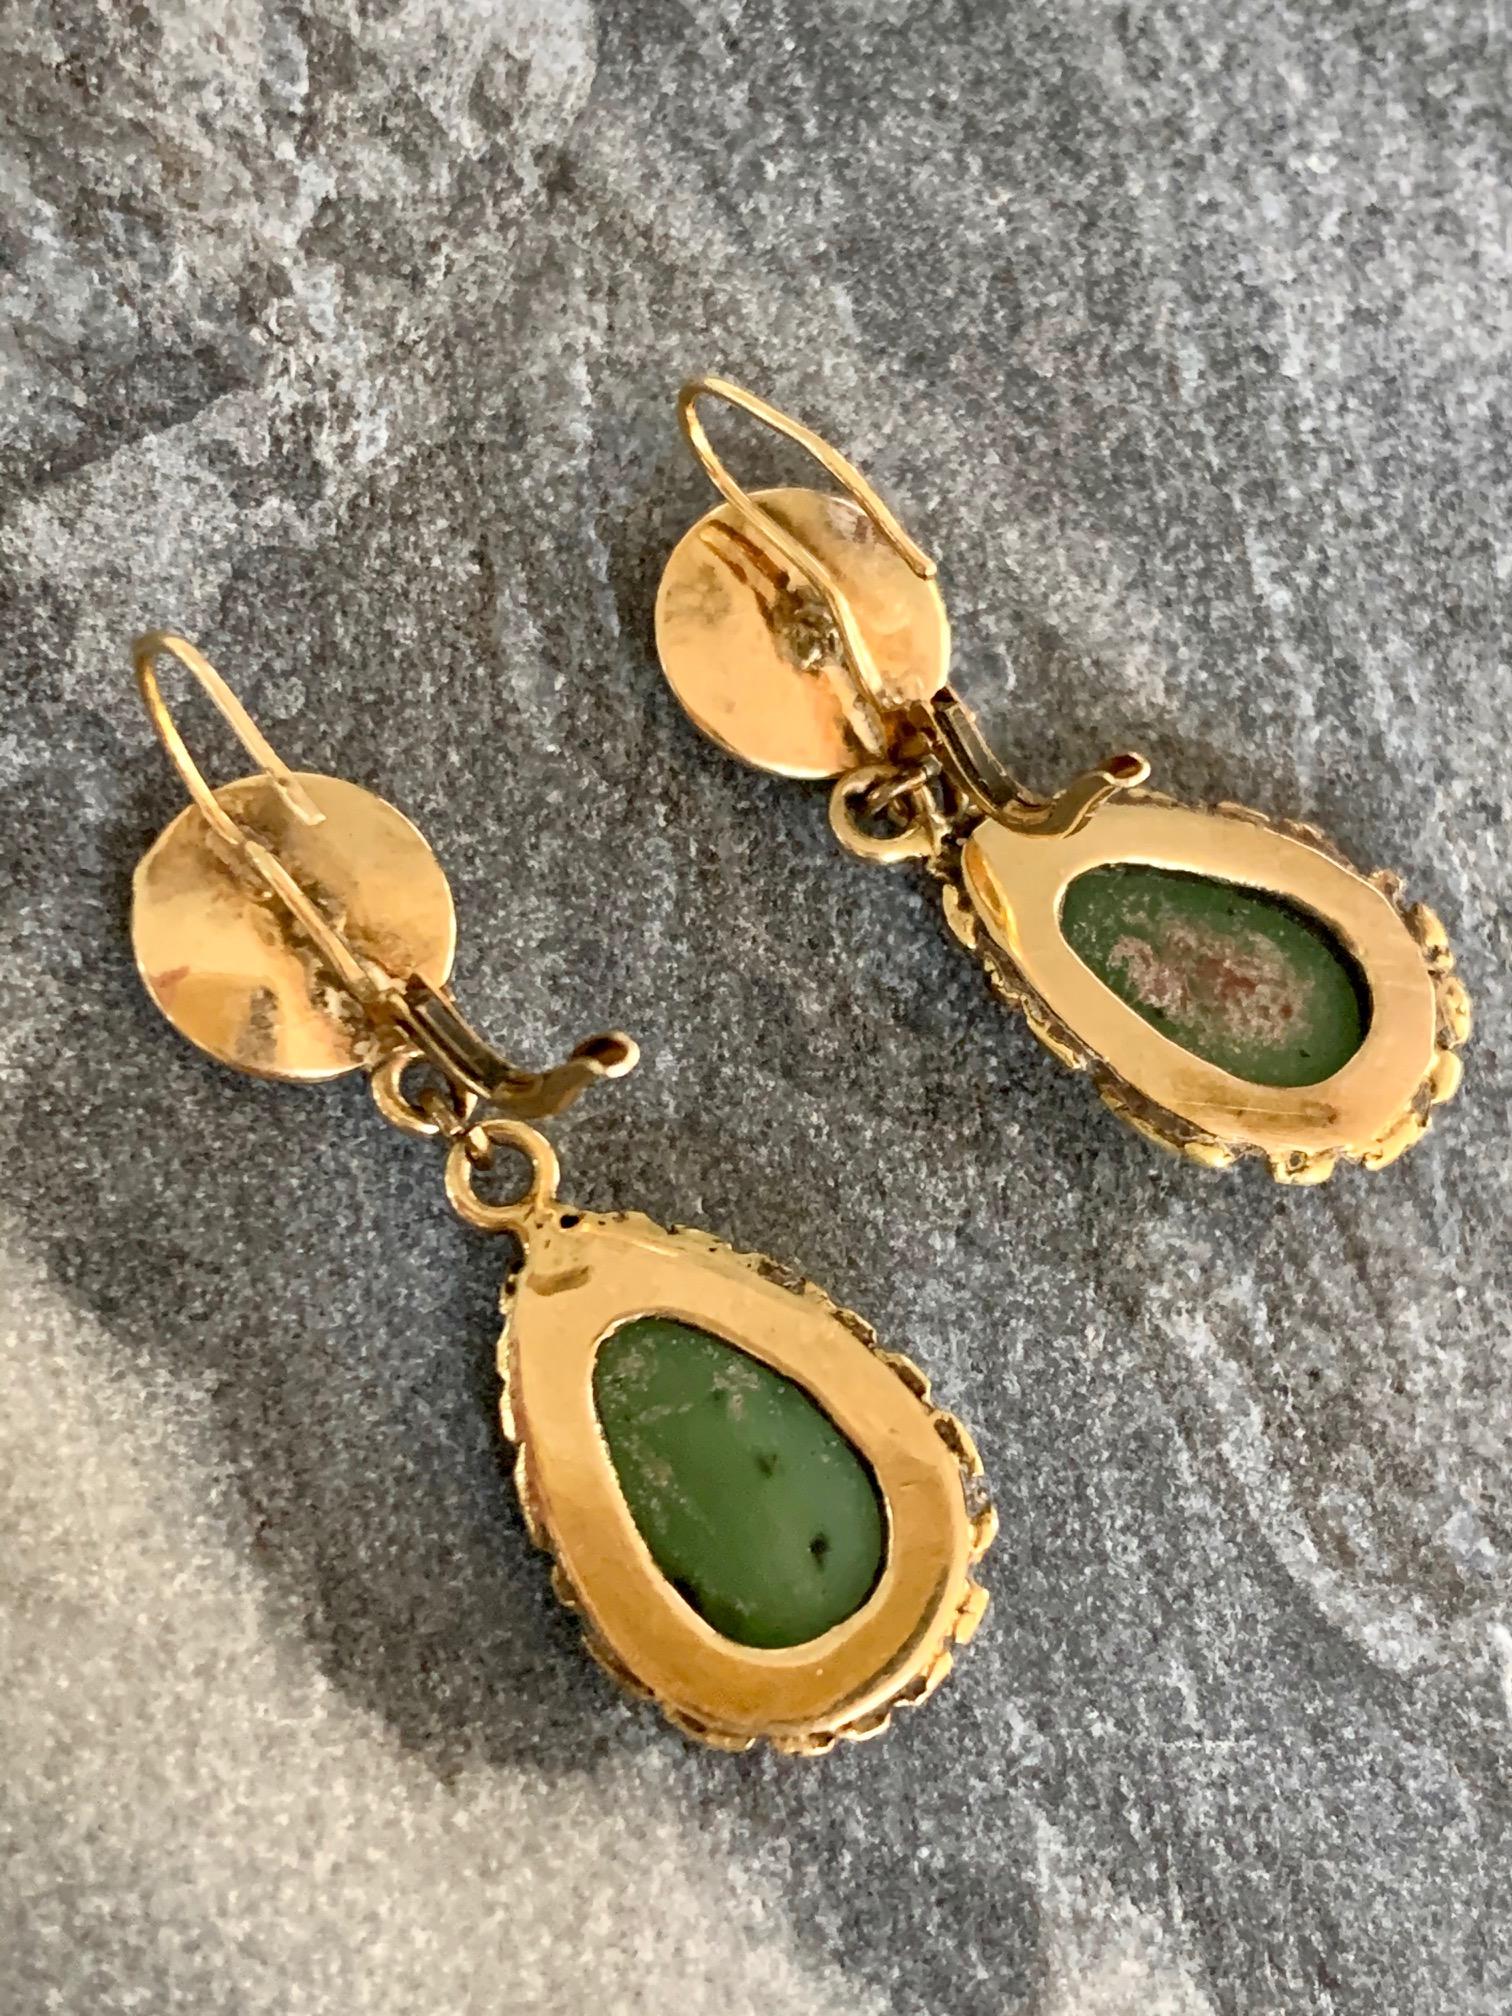 These beautiful Nephrite Jade drop earrings are so uniquely designed with Gold nuggets surrounding the stone and the earlobe post of the lever back.

The Jade is 12 x 6mm pear shaped cabochon.
Weight:  7.6 grams